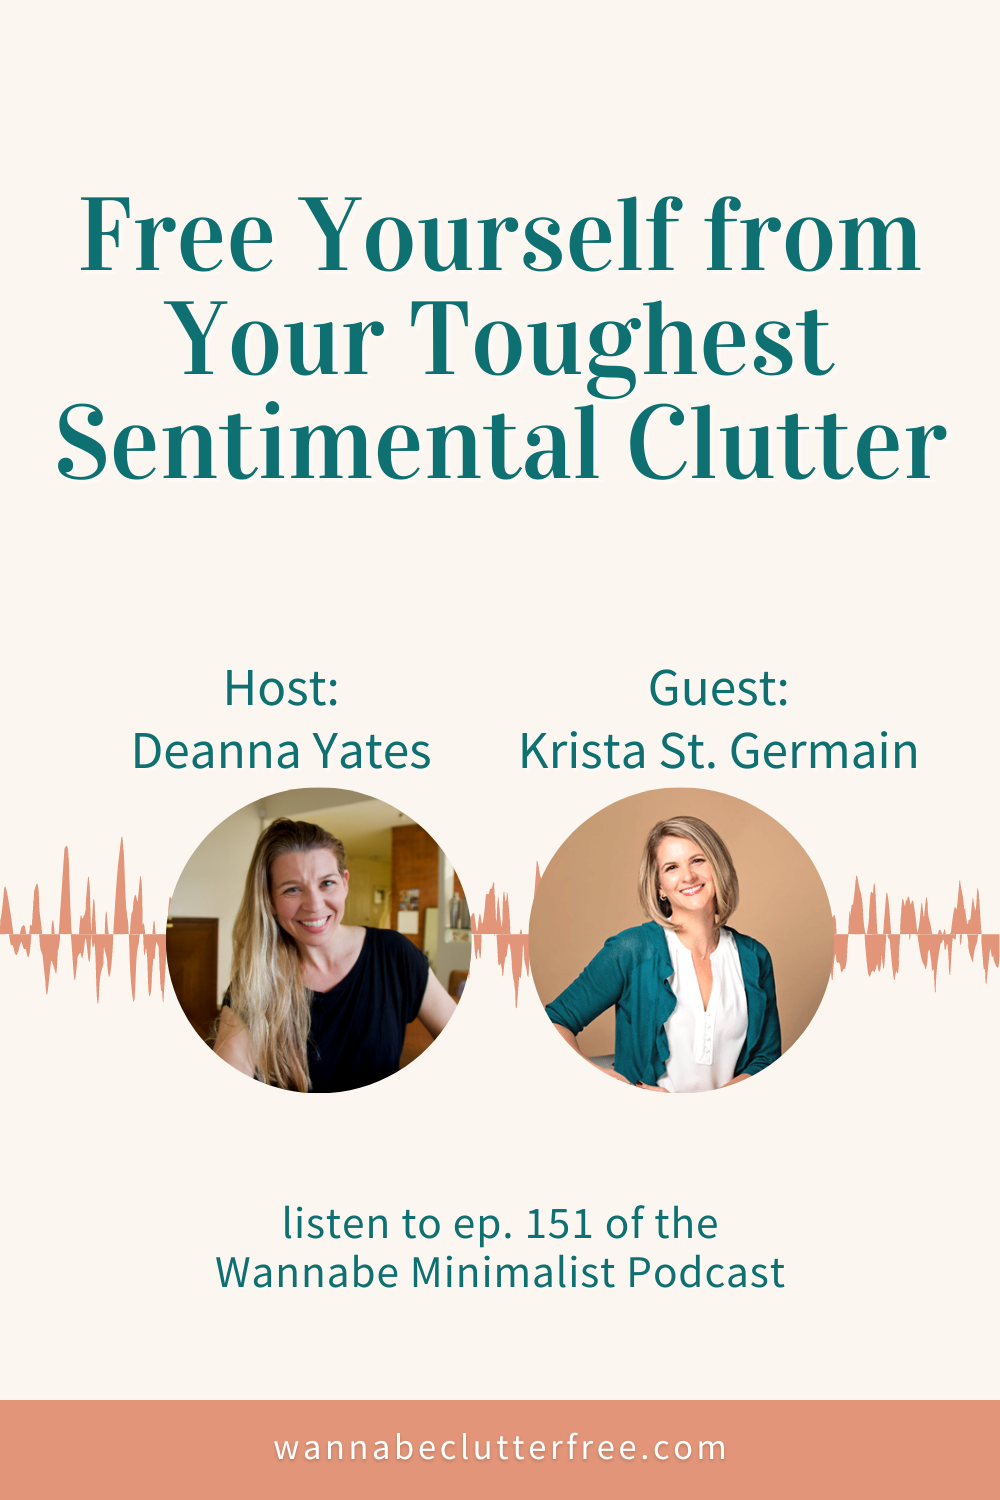 Free Yourself from Your Toughest Sentimental Clutter